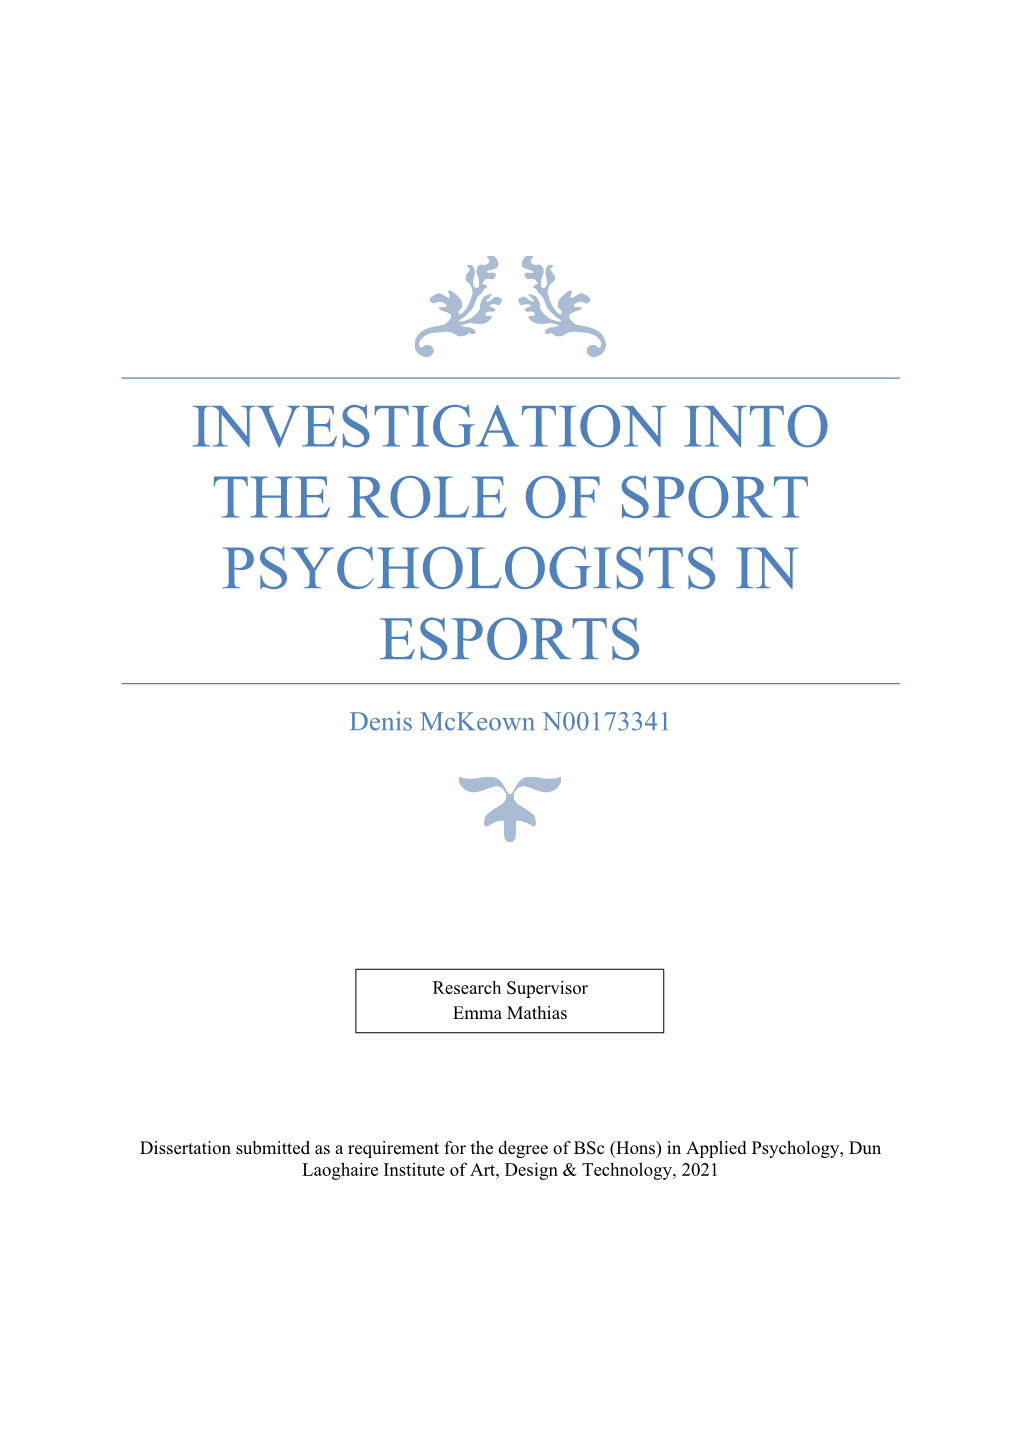 Investigation Into the Role of Sport Psychologists in Esports